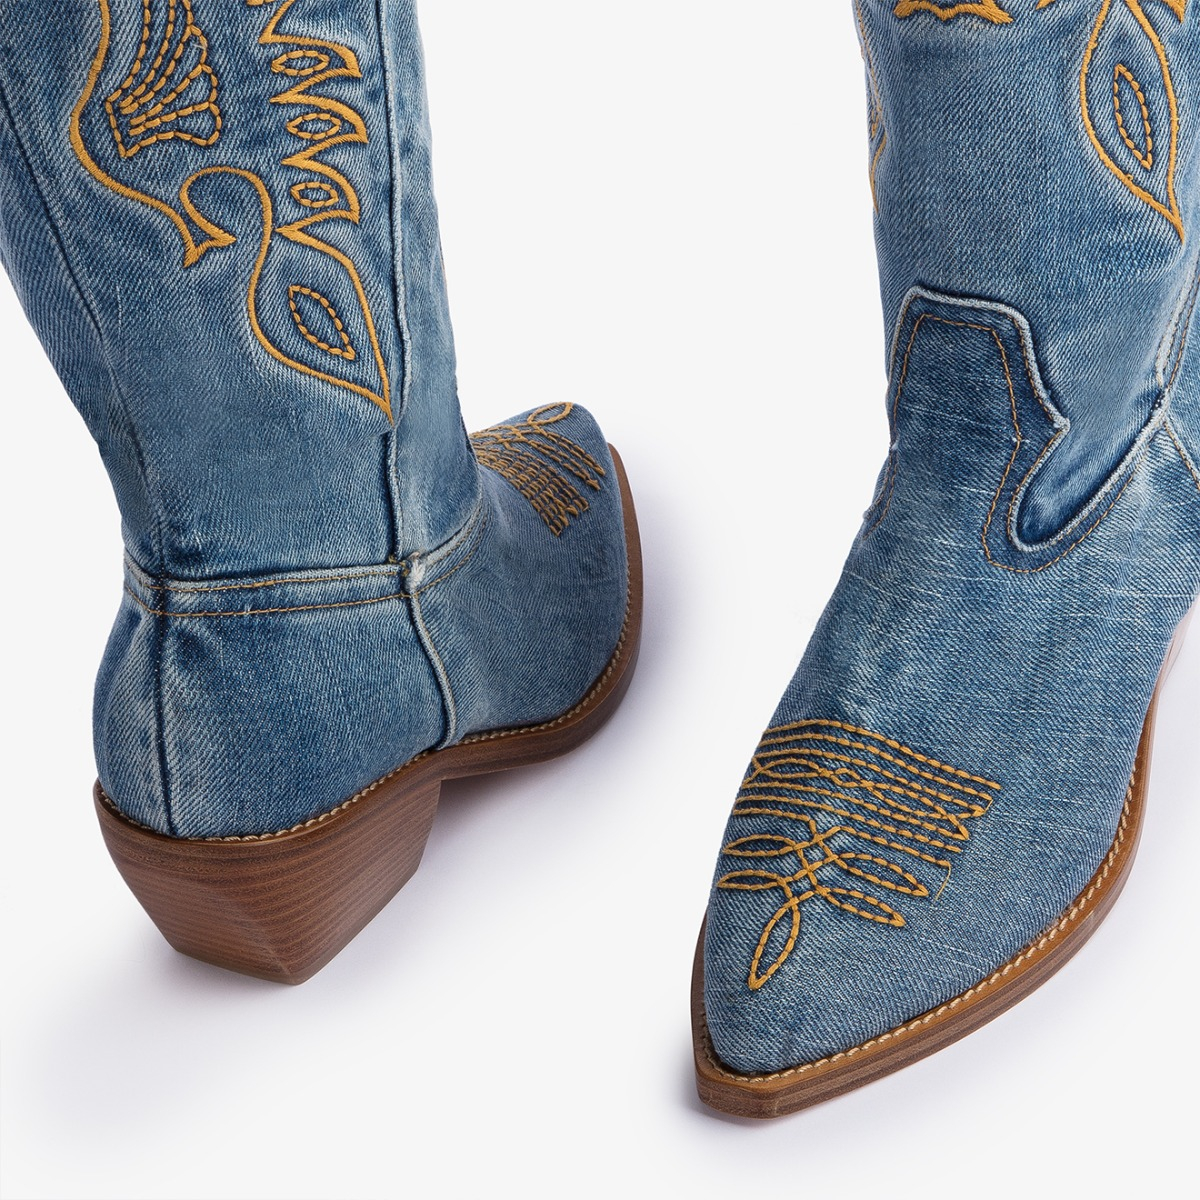 CHRISTINE COWBOY BOOT 60 mm - Le Silla | Official Online Store